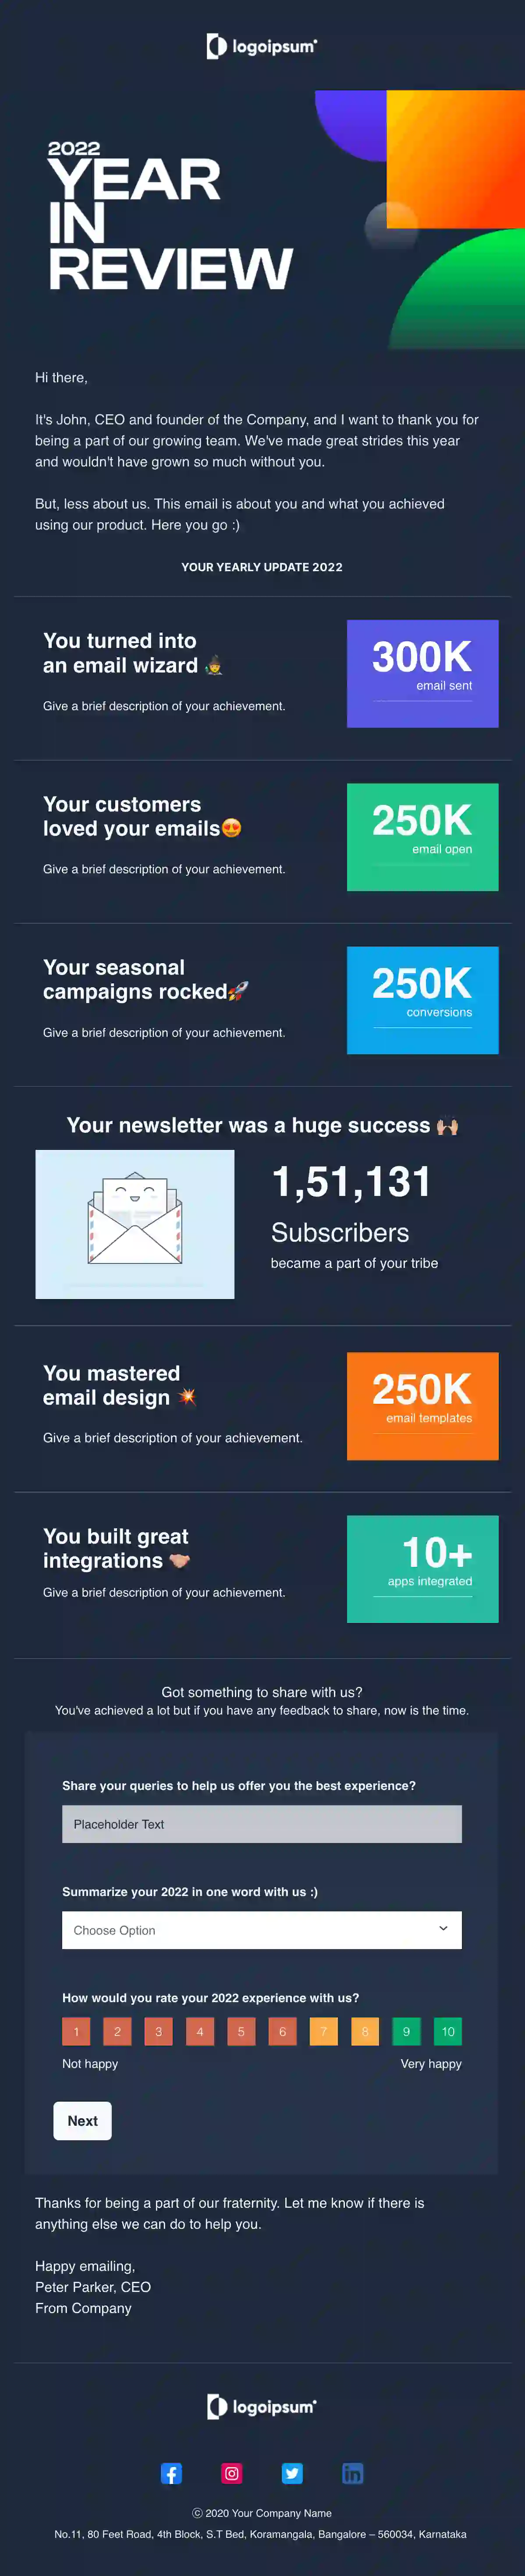 Year in Review Email Template (Dark Mode)